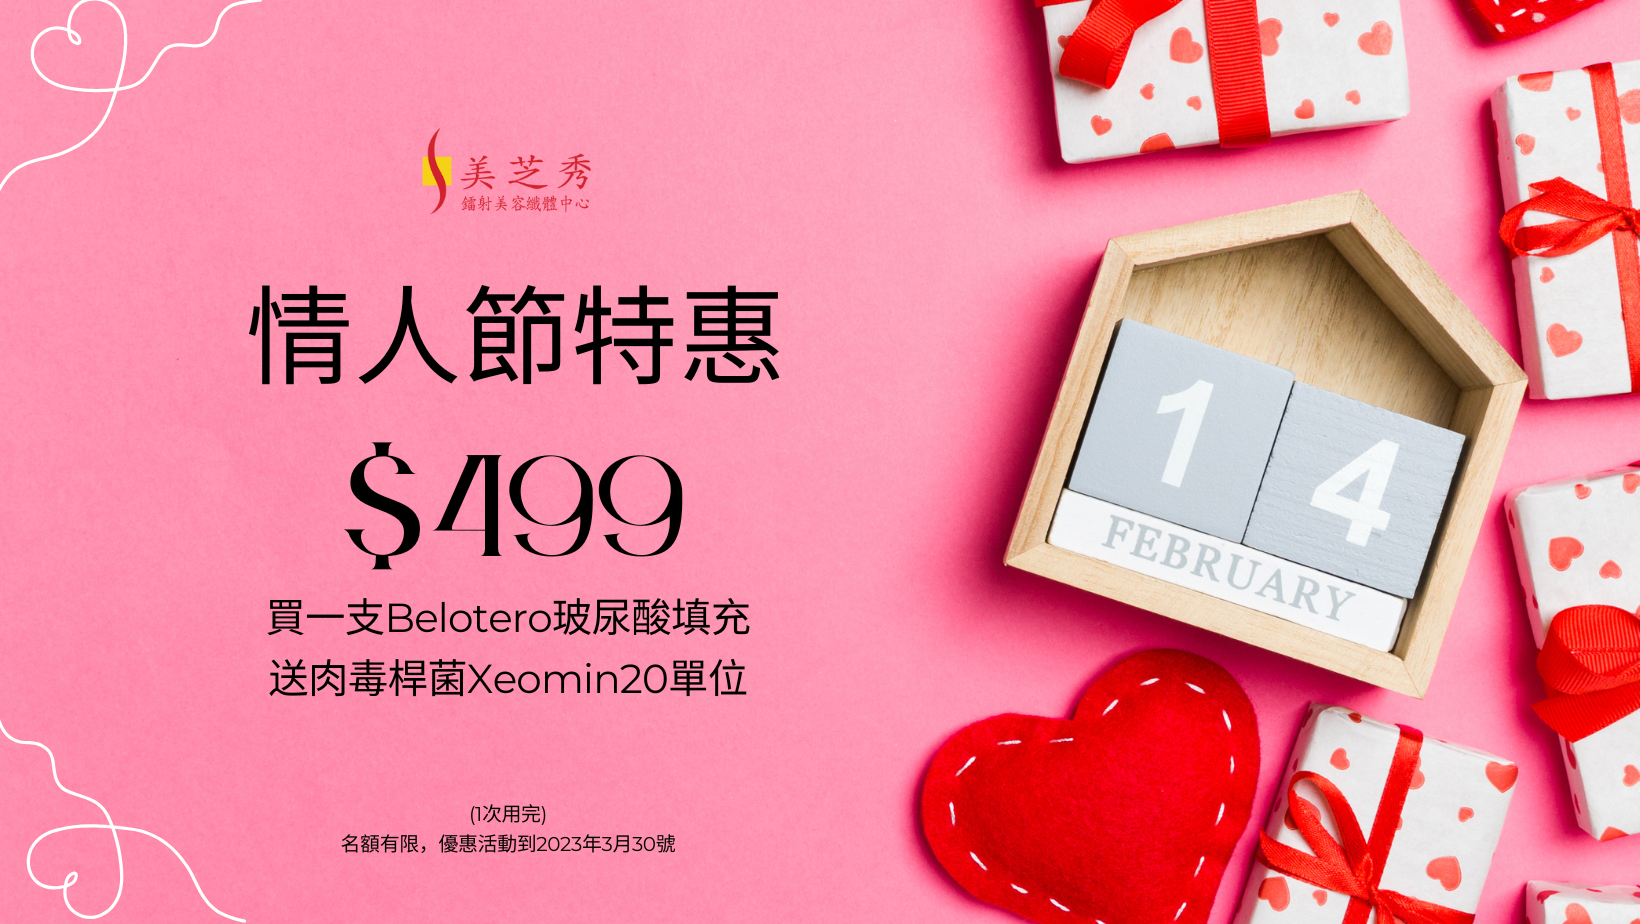 DSC February 2023 Valentine's Day Belotero promo Chinese text over pink background with hearts and gifts